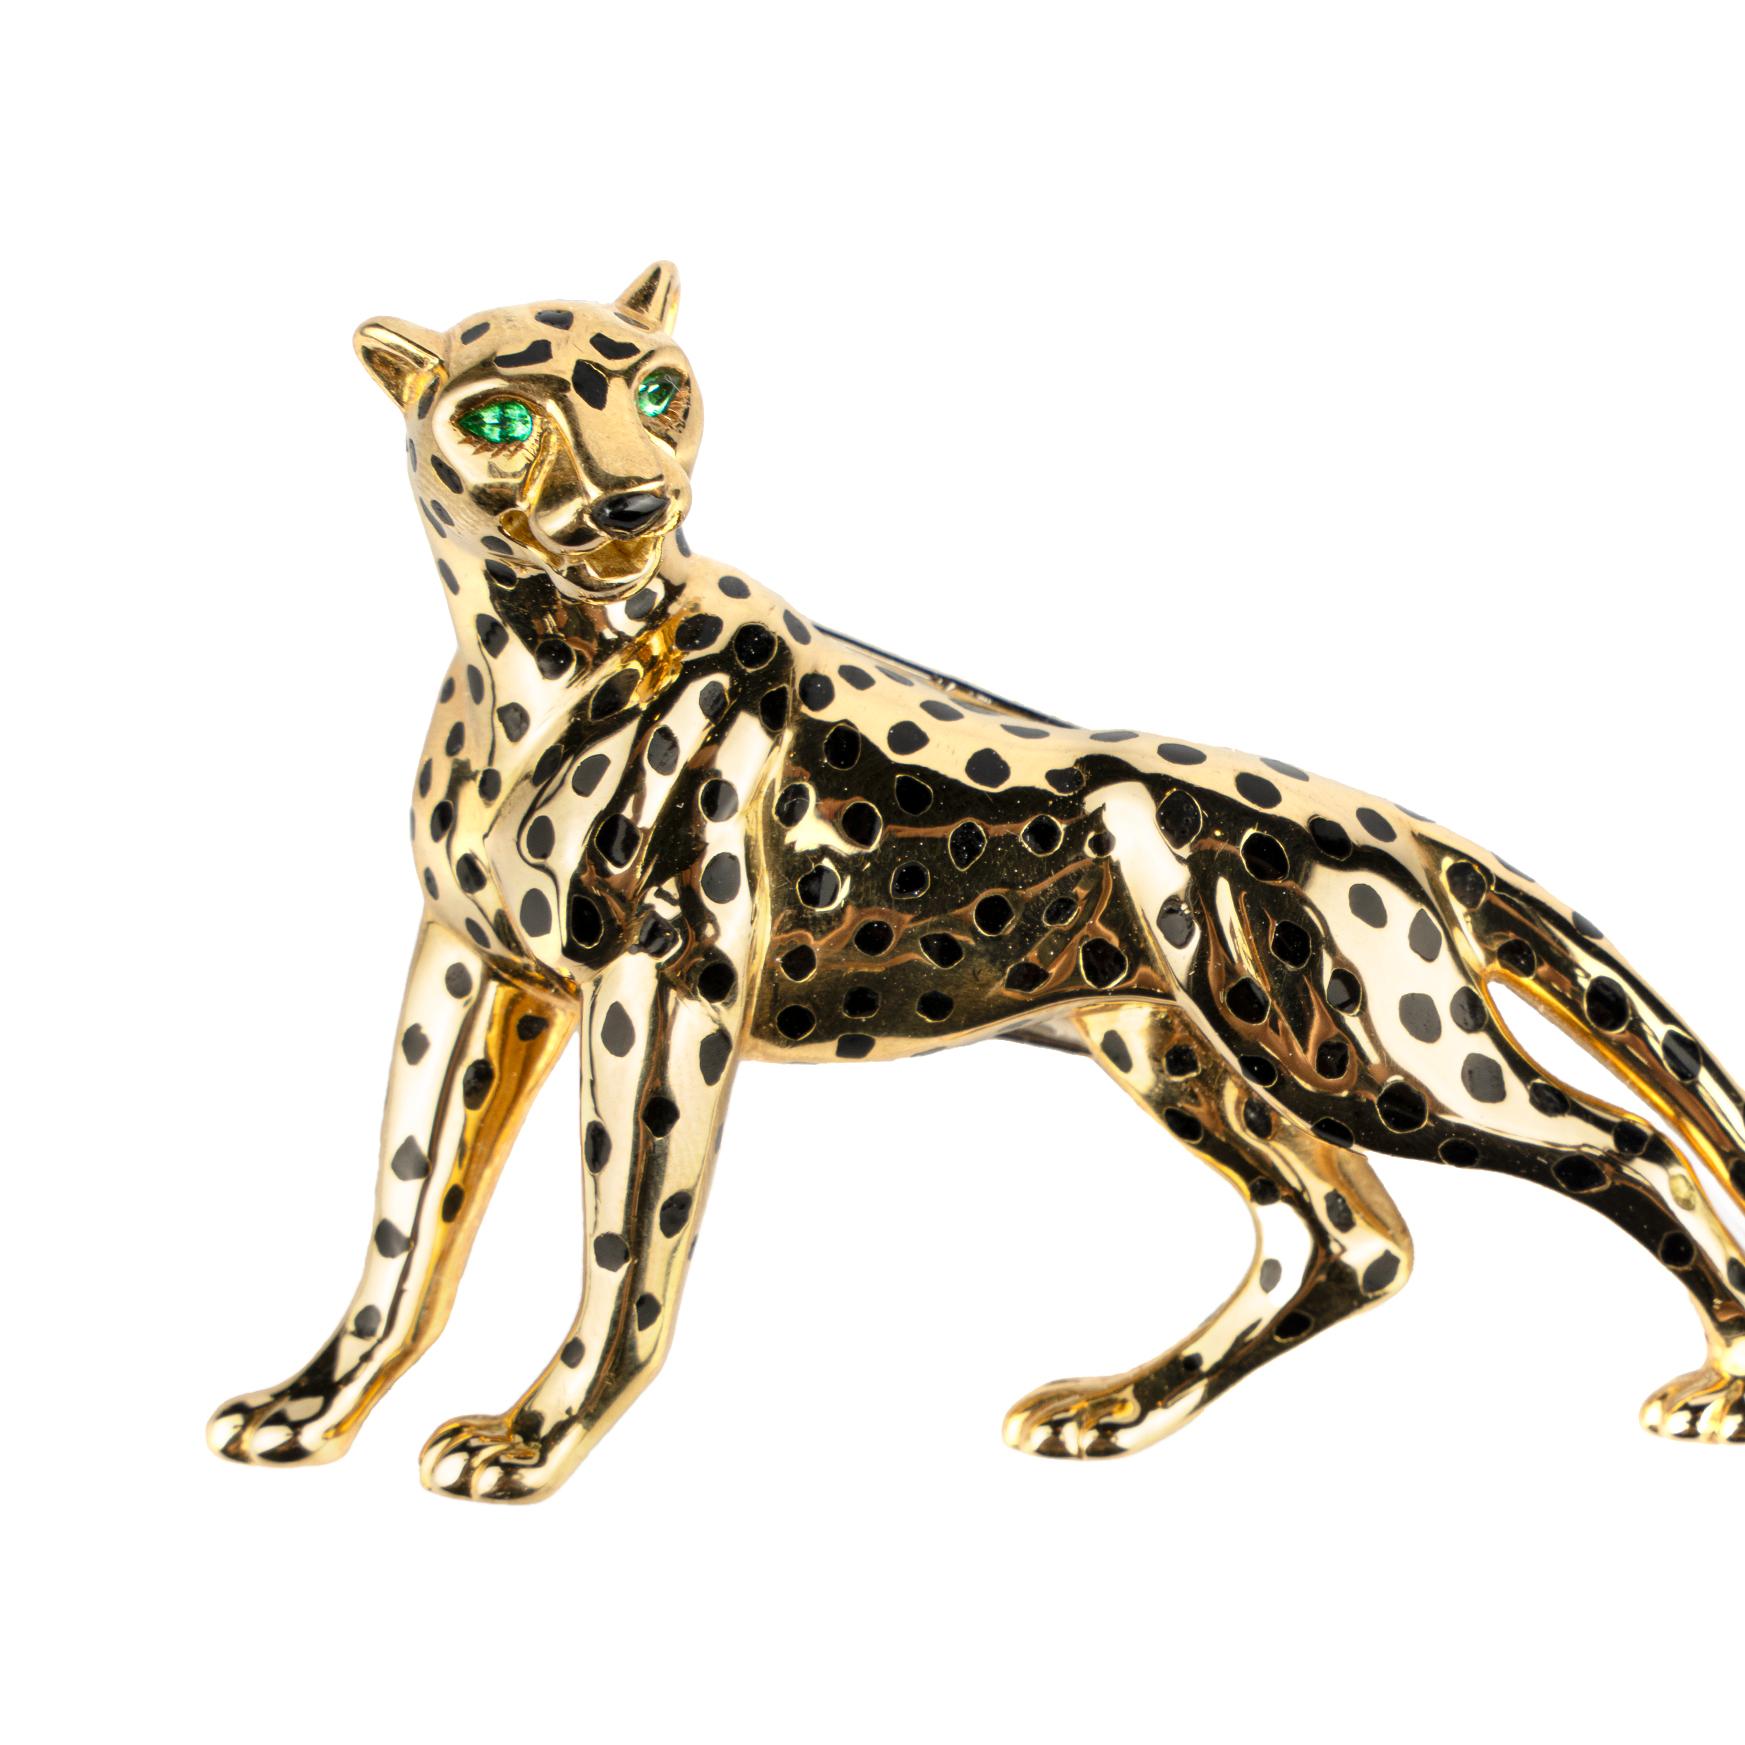 Collectible Cartier Panthère Brooch in 18k gold with black enamel spots and emerald eyes. Made in Paris, circa 1980.